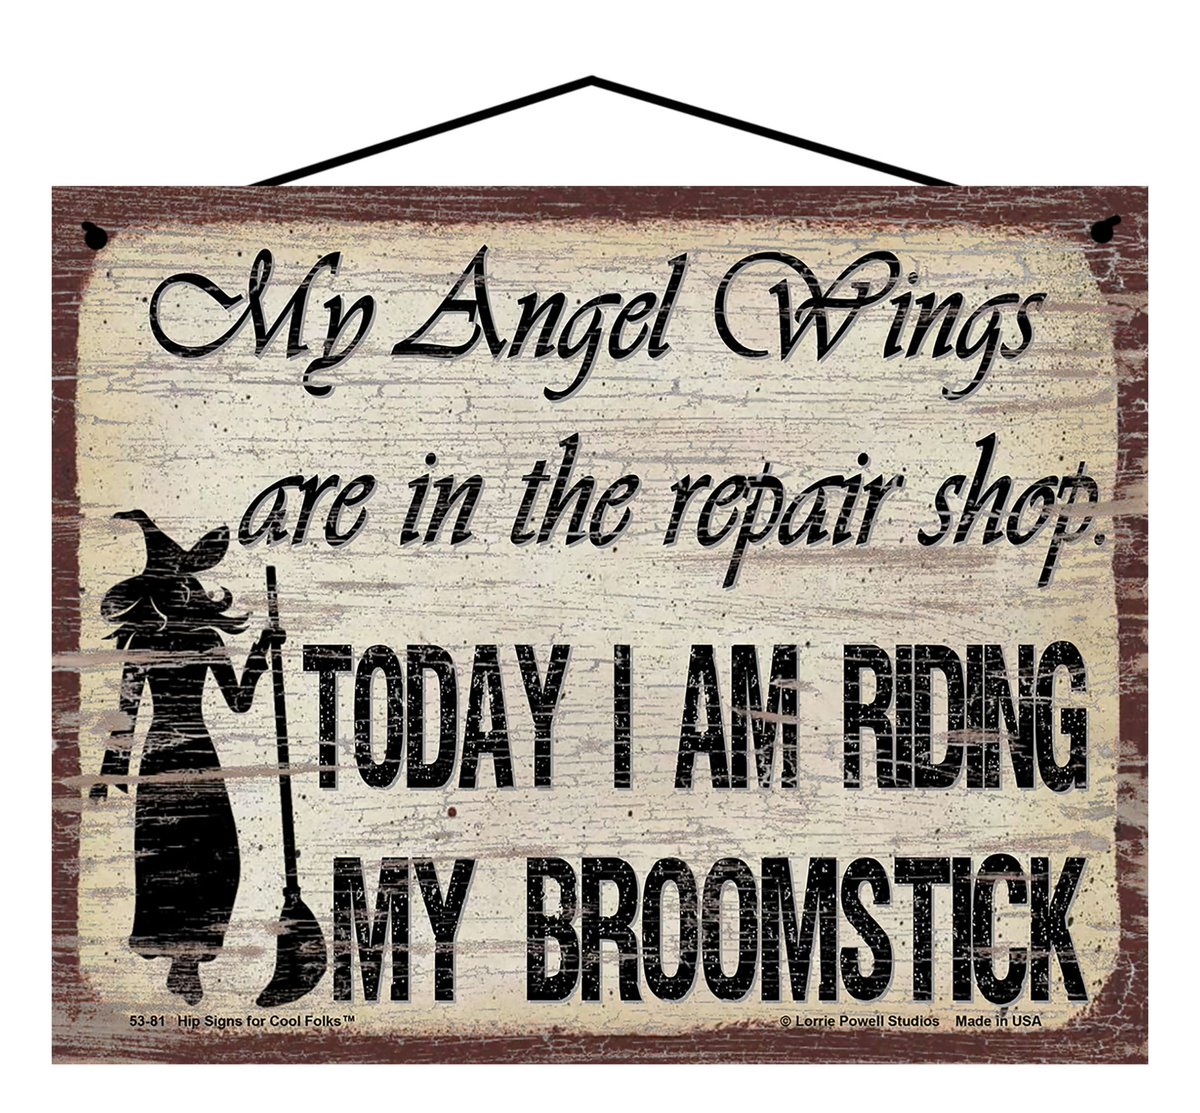 My Angel Wings are in the Repair Shop.  Today I am Riding my Broomstick!

Signs make great gifts!  Get this one on Amazon!
buff.ly/415mqUH 

#AmazonFinds #Witches #WitchyGifts #WitchGifts #AngelWings #GiftIdeas #Gifts #ChristmasGifts